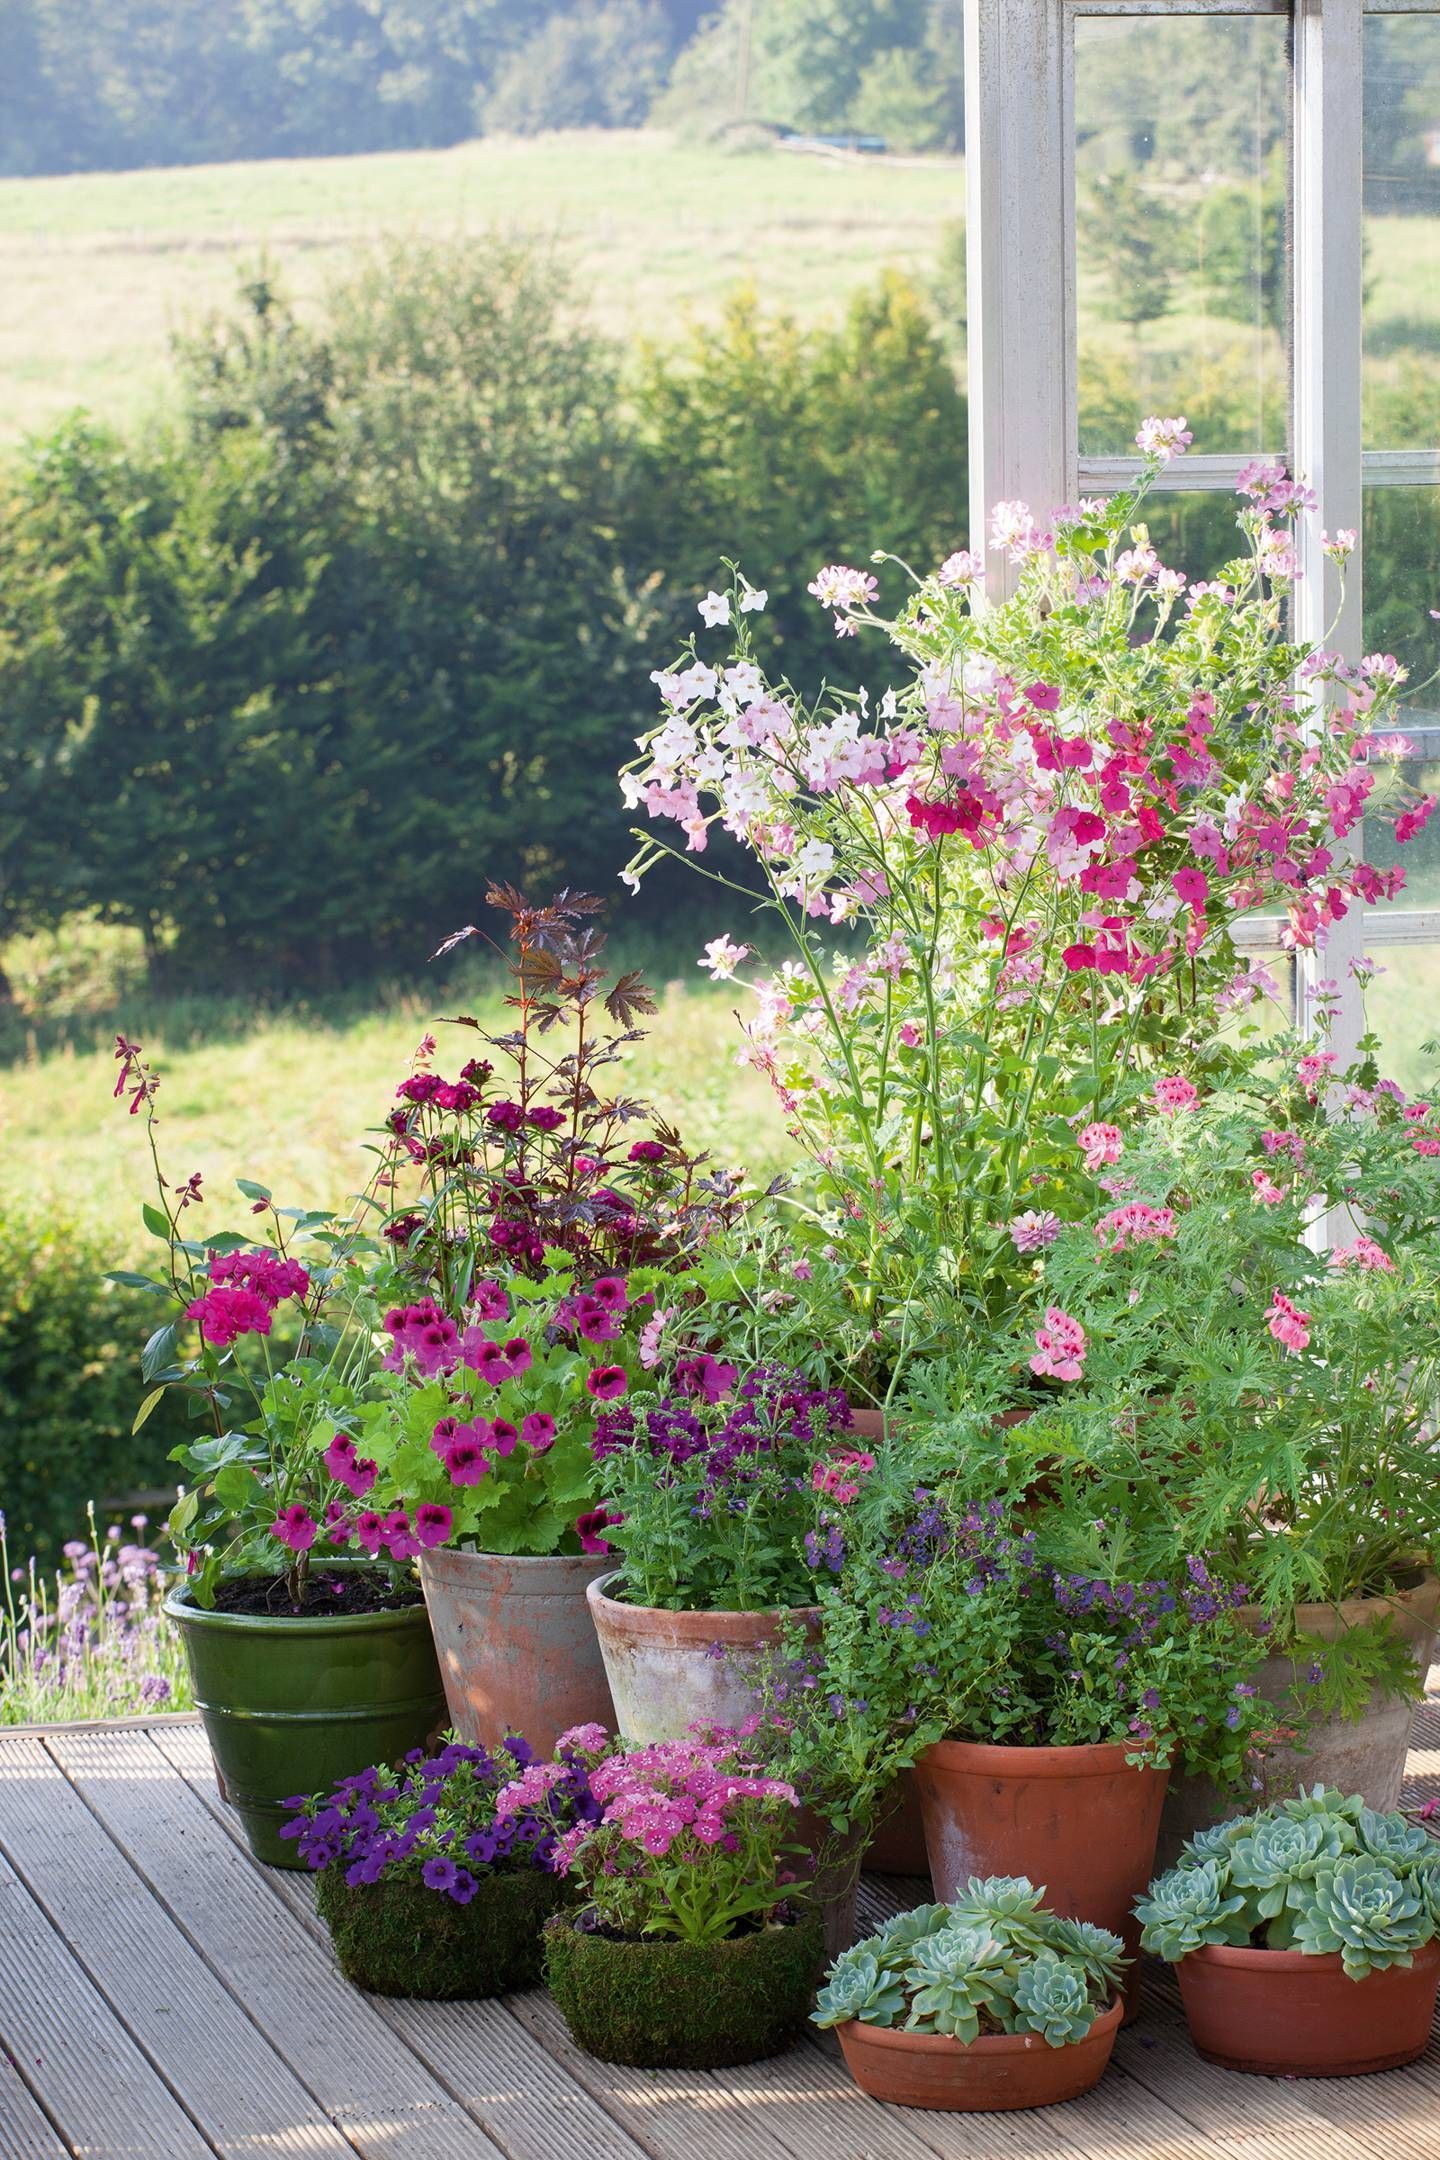 How to plant in pots and containers part 3: summer -   23 decorating garden pots
 ideas